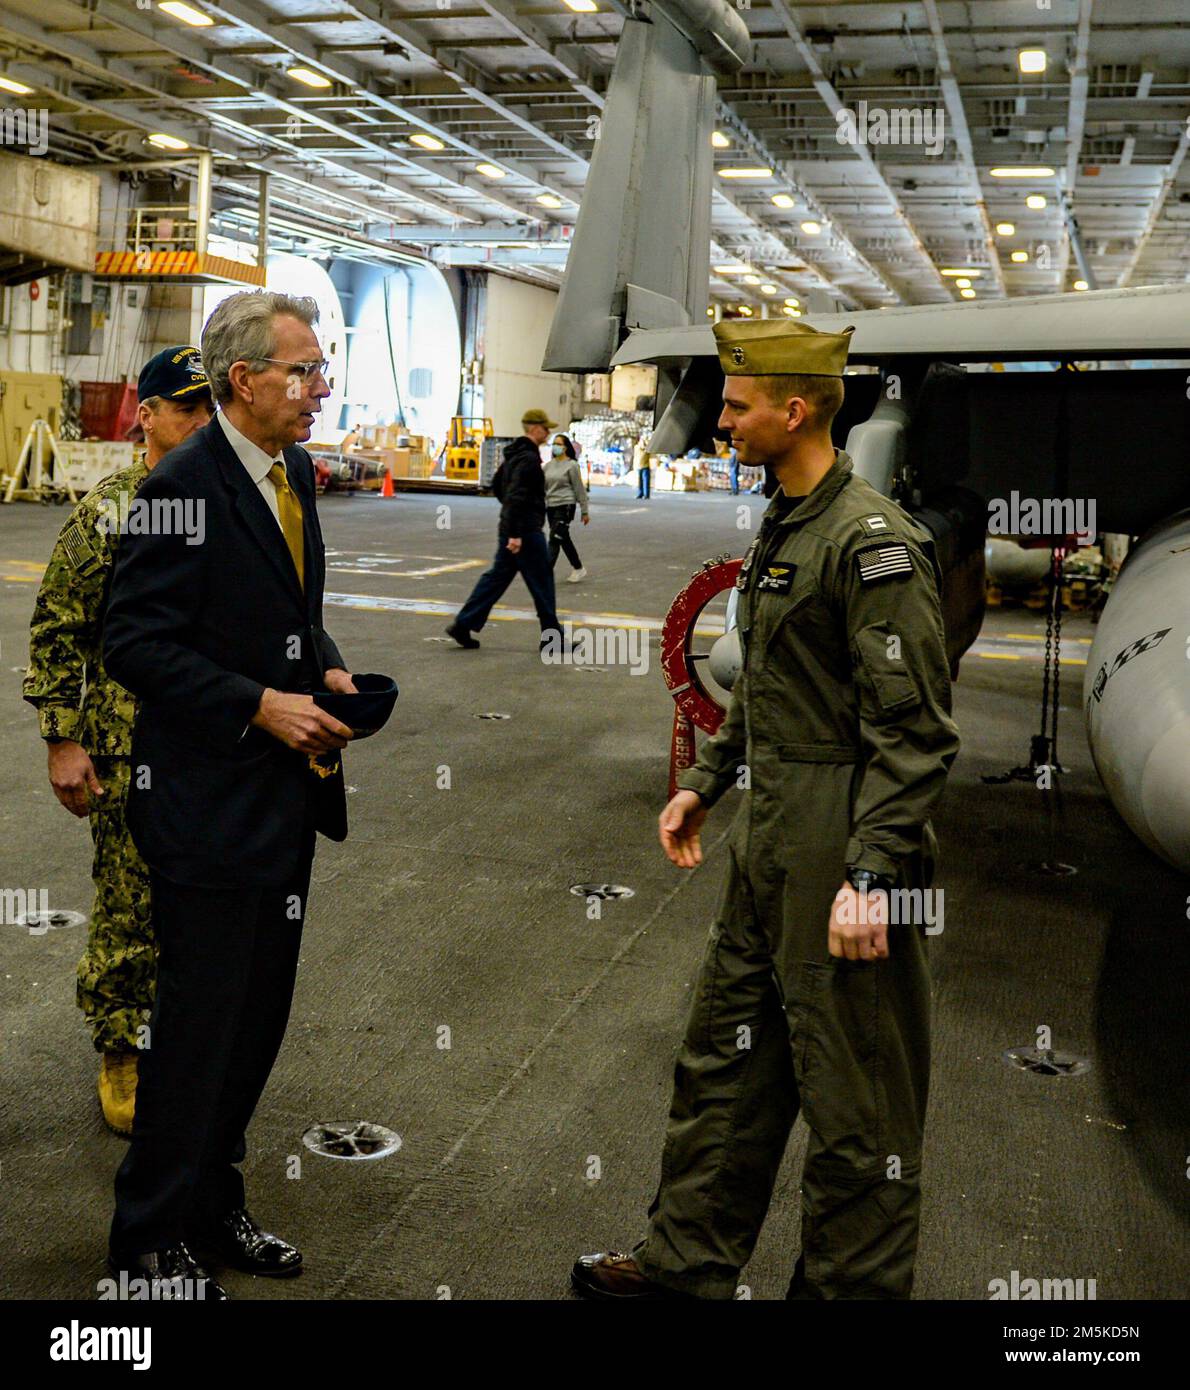 220322-N-FB730-1048 SOUDA BAY, GREECE (Mar. 22, 2022) U.S. Ambassador to Greece, Geoffrey R. Pyatt, speaks to Lt. Taylor Scott, from Bellevue, Nebraska, assigned to the 'Rooks' of Electronic Attack Squadron (VAQ) 137, during a visit aboard the Nimitz-class aircraft carrier USS Harry S. Truman (CVN 75), Mar. 22, 2022. The Harry S. Truman Carrier Strike Group is on a scheduled deployment in the U.S. Sixth Fleet area of operations in support of U.S., allied and partner interests in Europe and Africa. Stock Photo